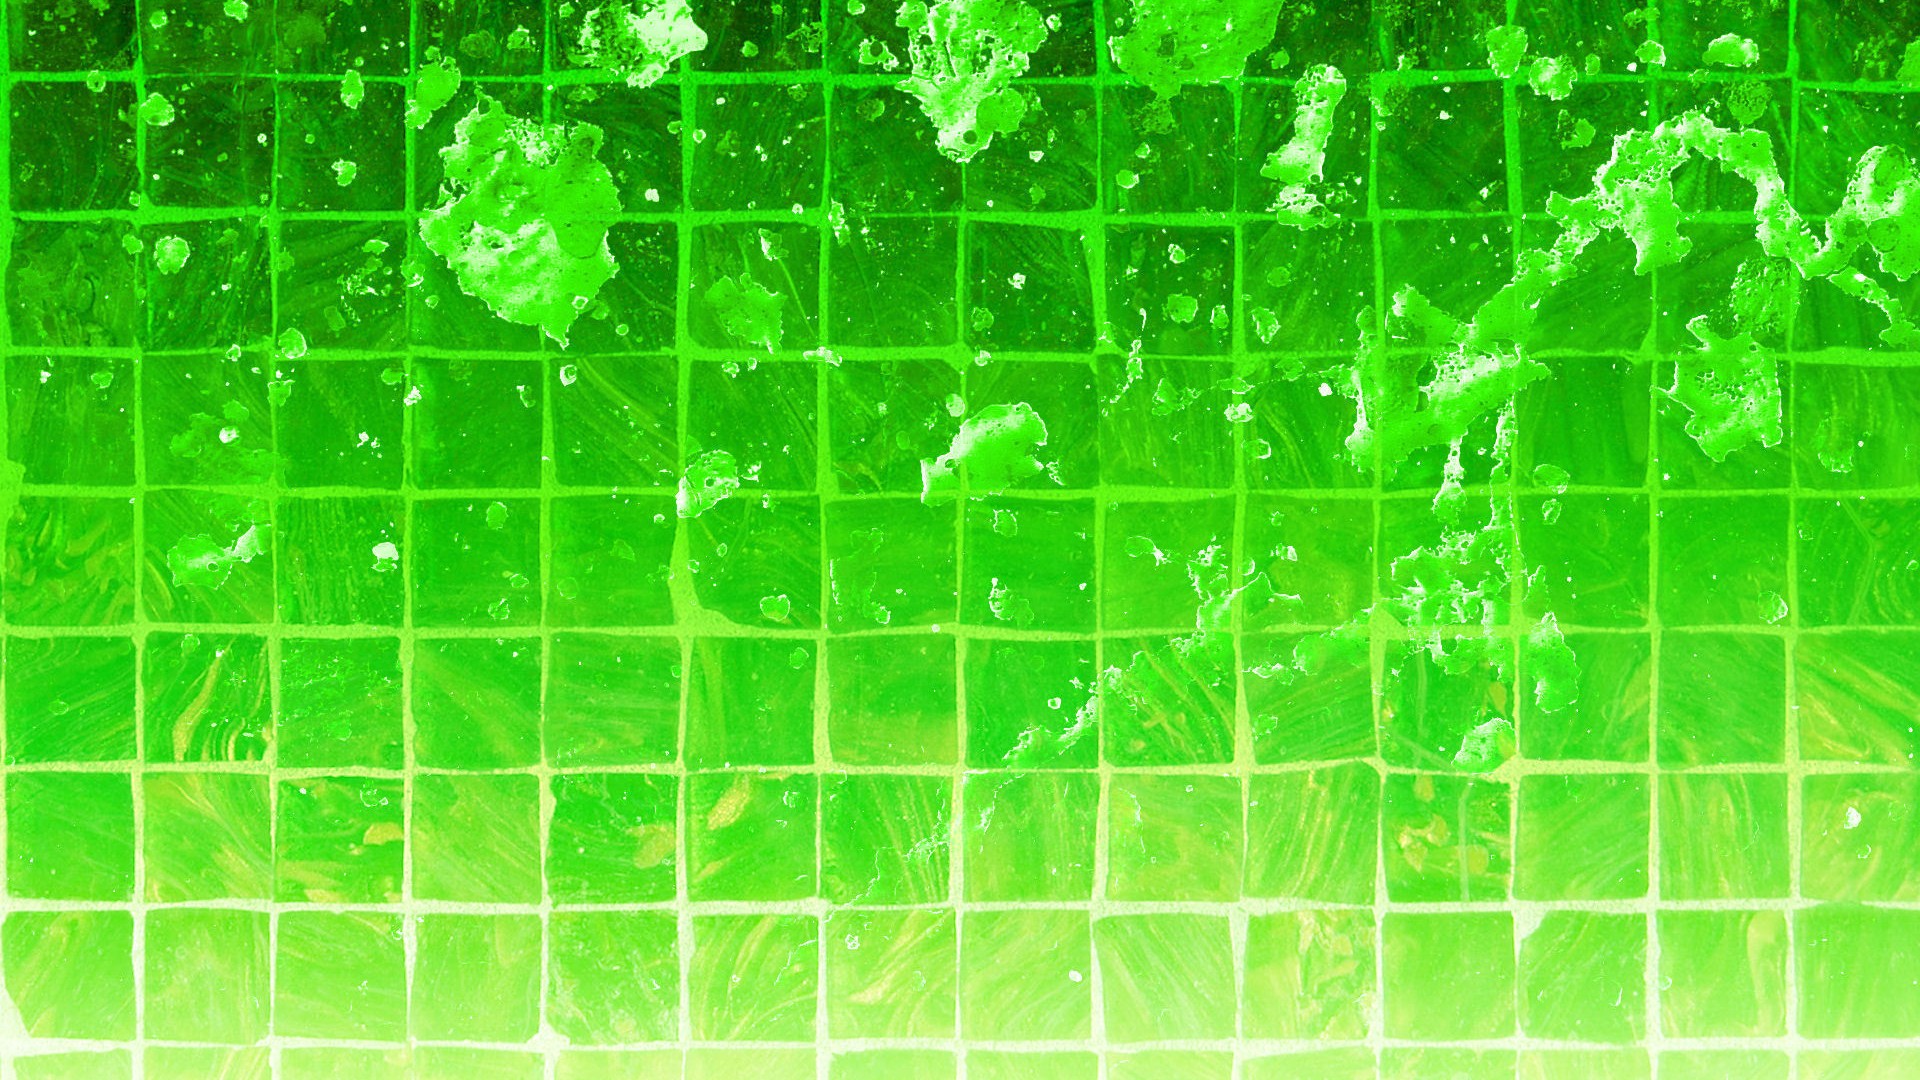 Lime Green Wallpaper HD with image resolution 1920x1080 pixel. You can make this wallpaper for your Desktop Computer Backgrounds, Mac Wallpapers, Android Lock screen or iPhone Screensavers